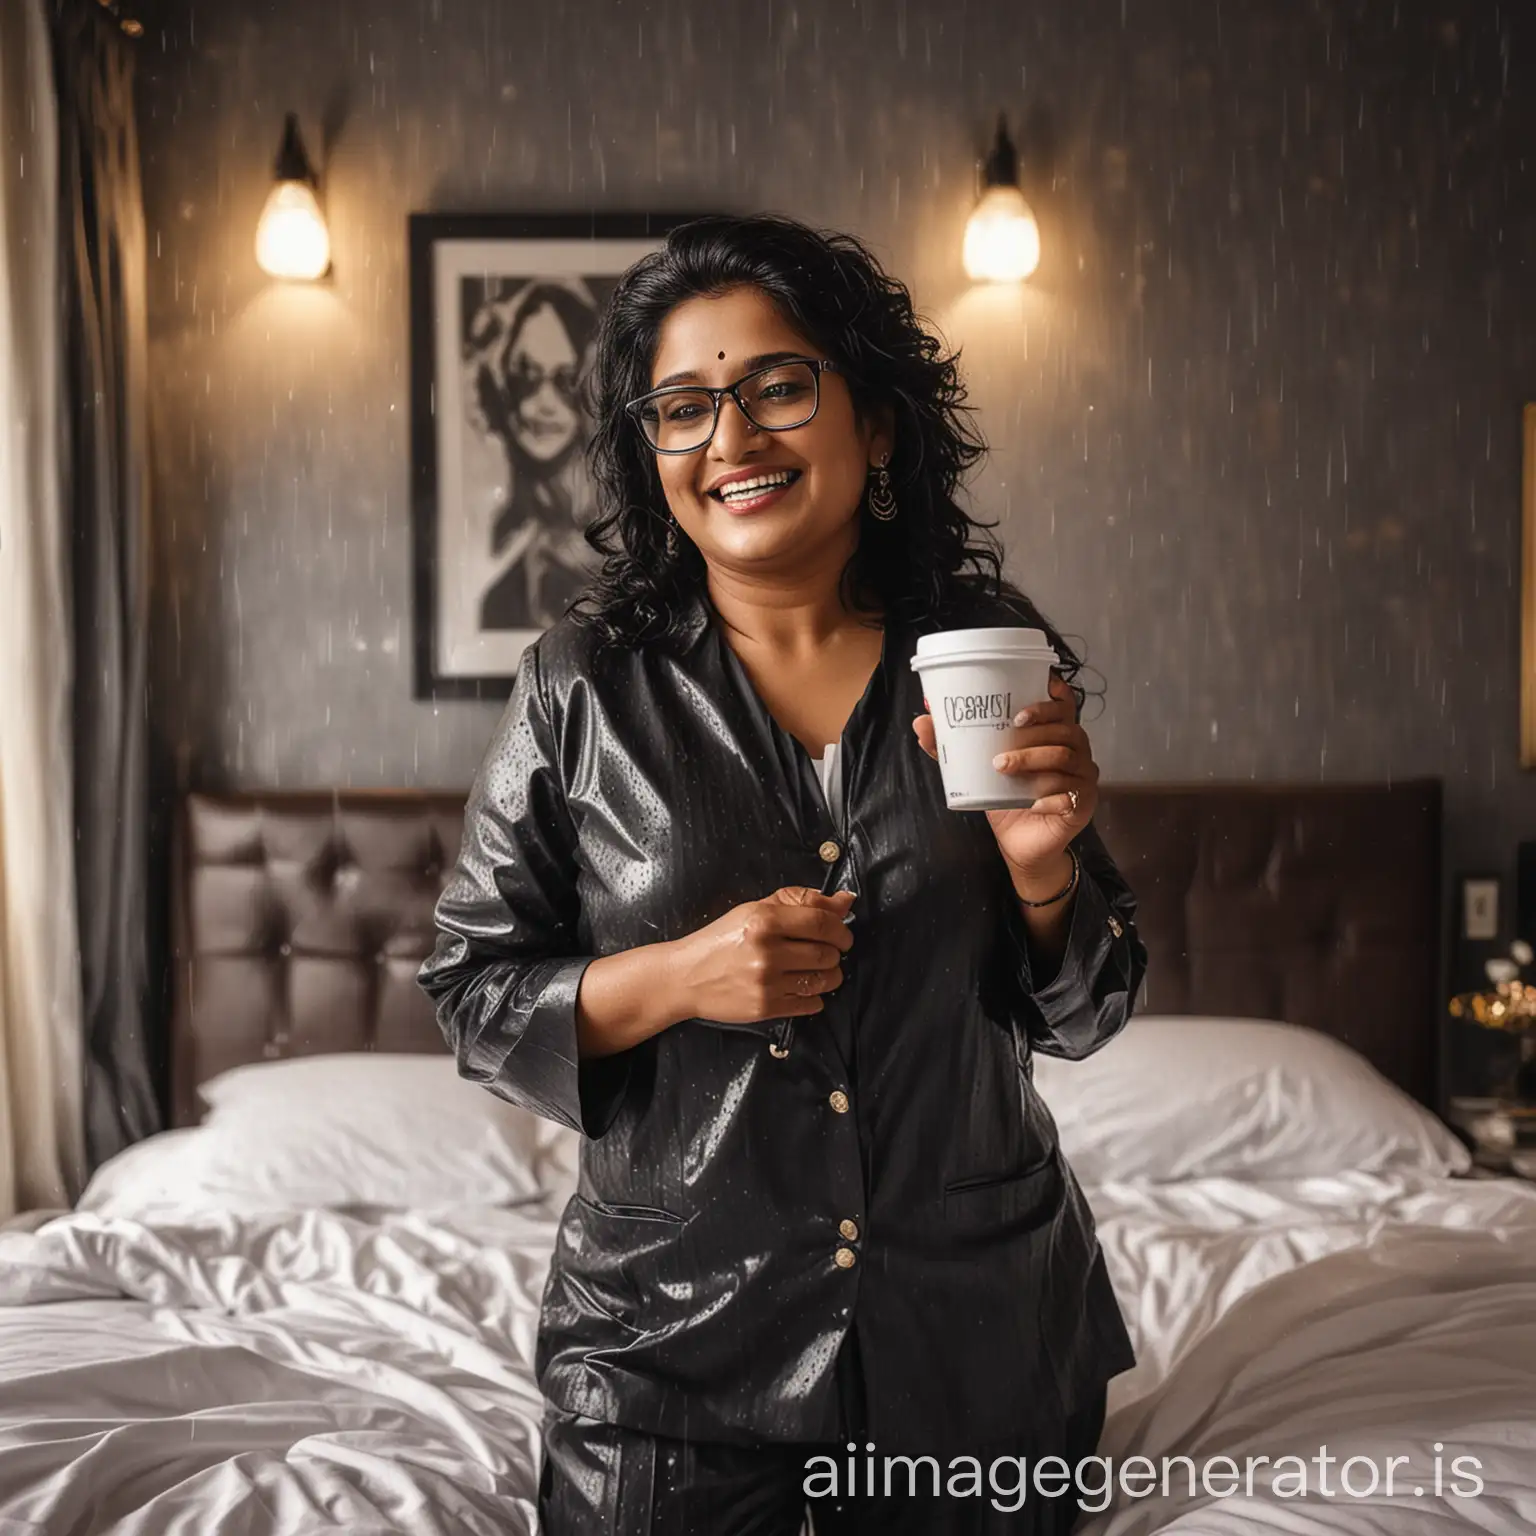 a mature fat indian woman with 45 years old age wearing Prescription Eyeglasses on face with curvy body wearing a judge suit with full make up, open hair style, holding a cup of coffee, sleeping on a luxurious bed, she is happy and smiling, its evening and raining and a lot of lights are there, she is wet and a indian muscular man is near her